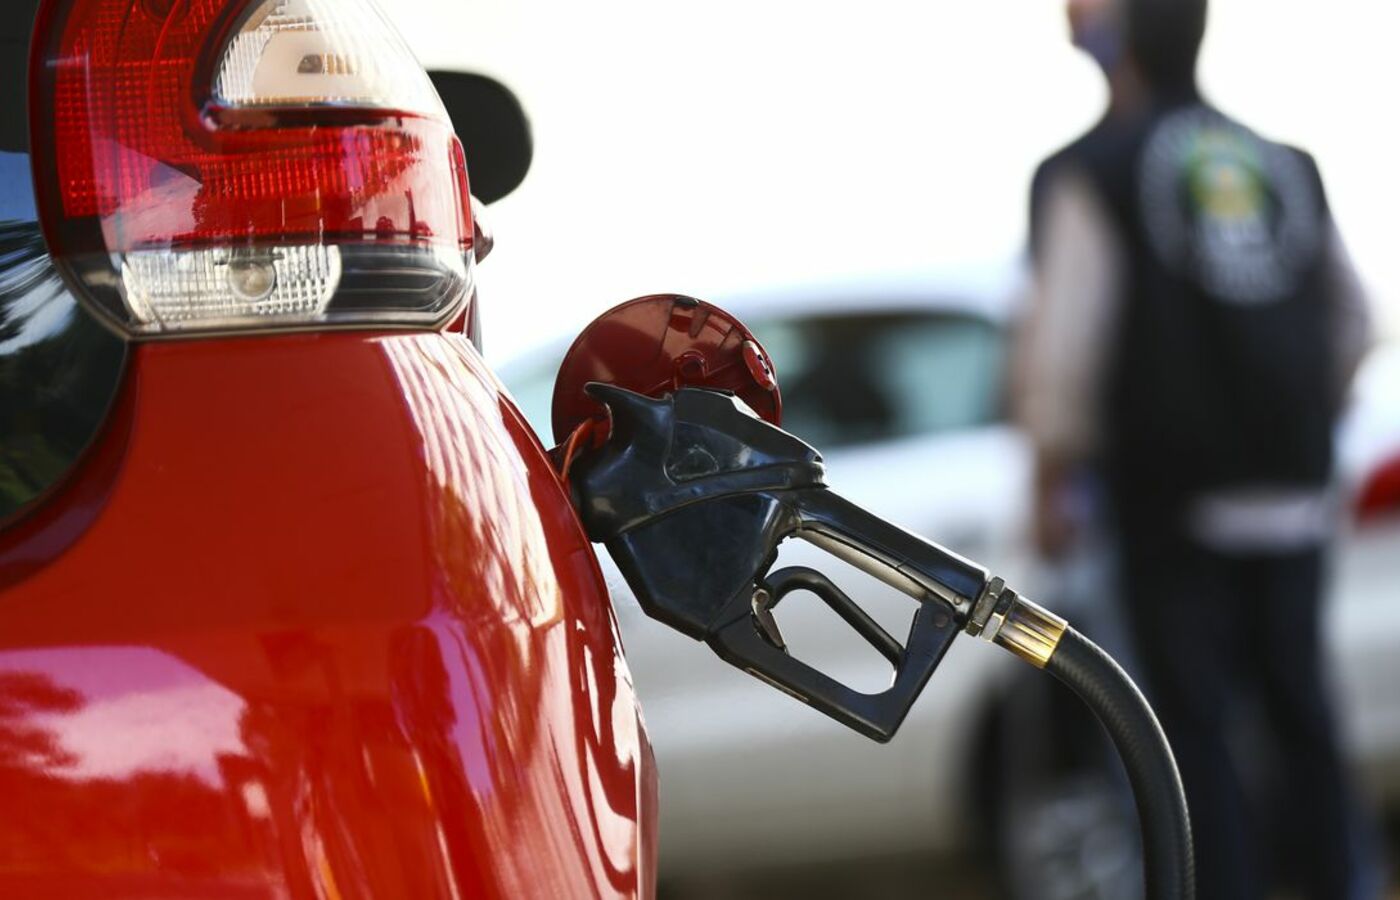 Inside the Public Budget: More expensive gasoline?  Understand fuel recovery